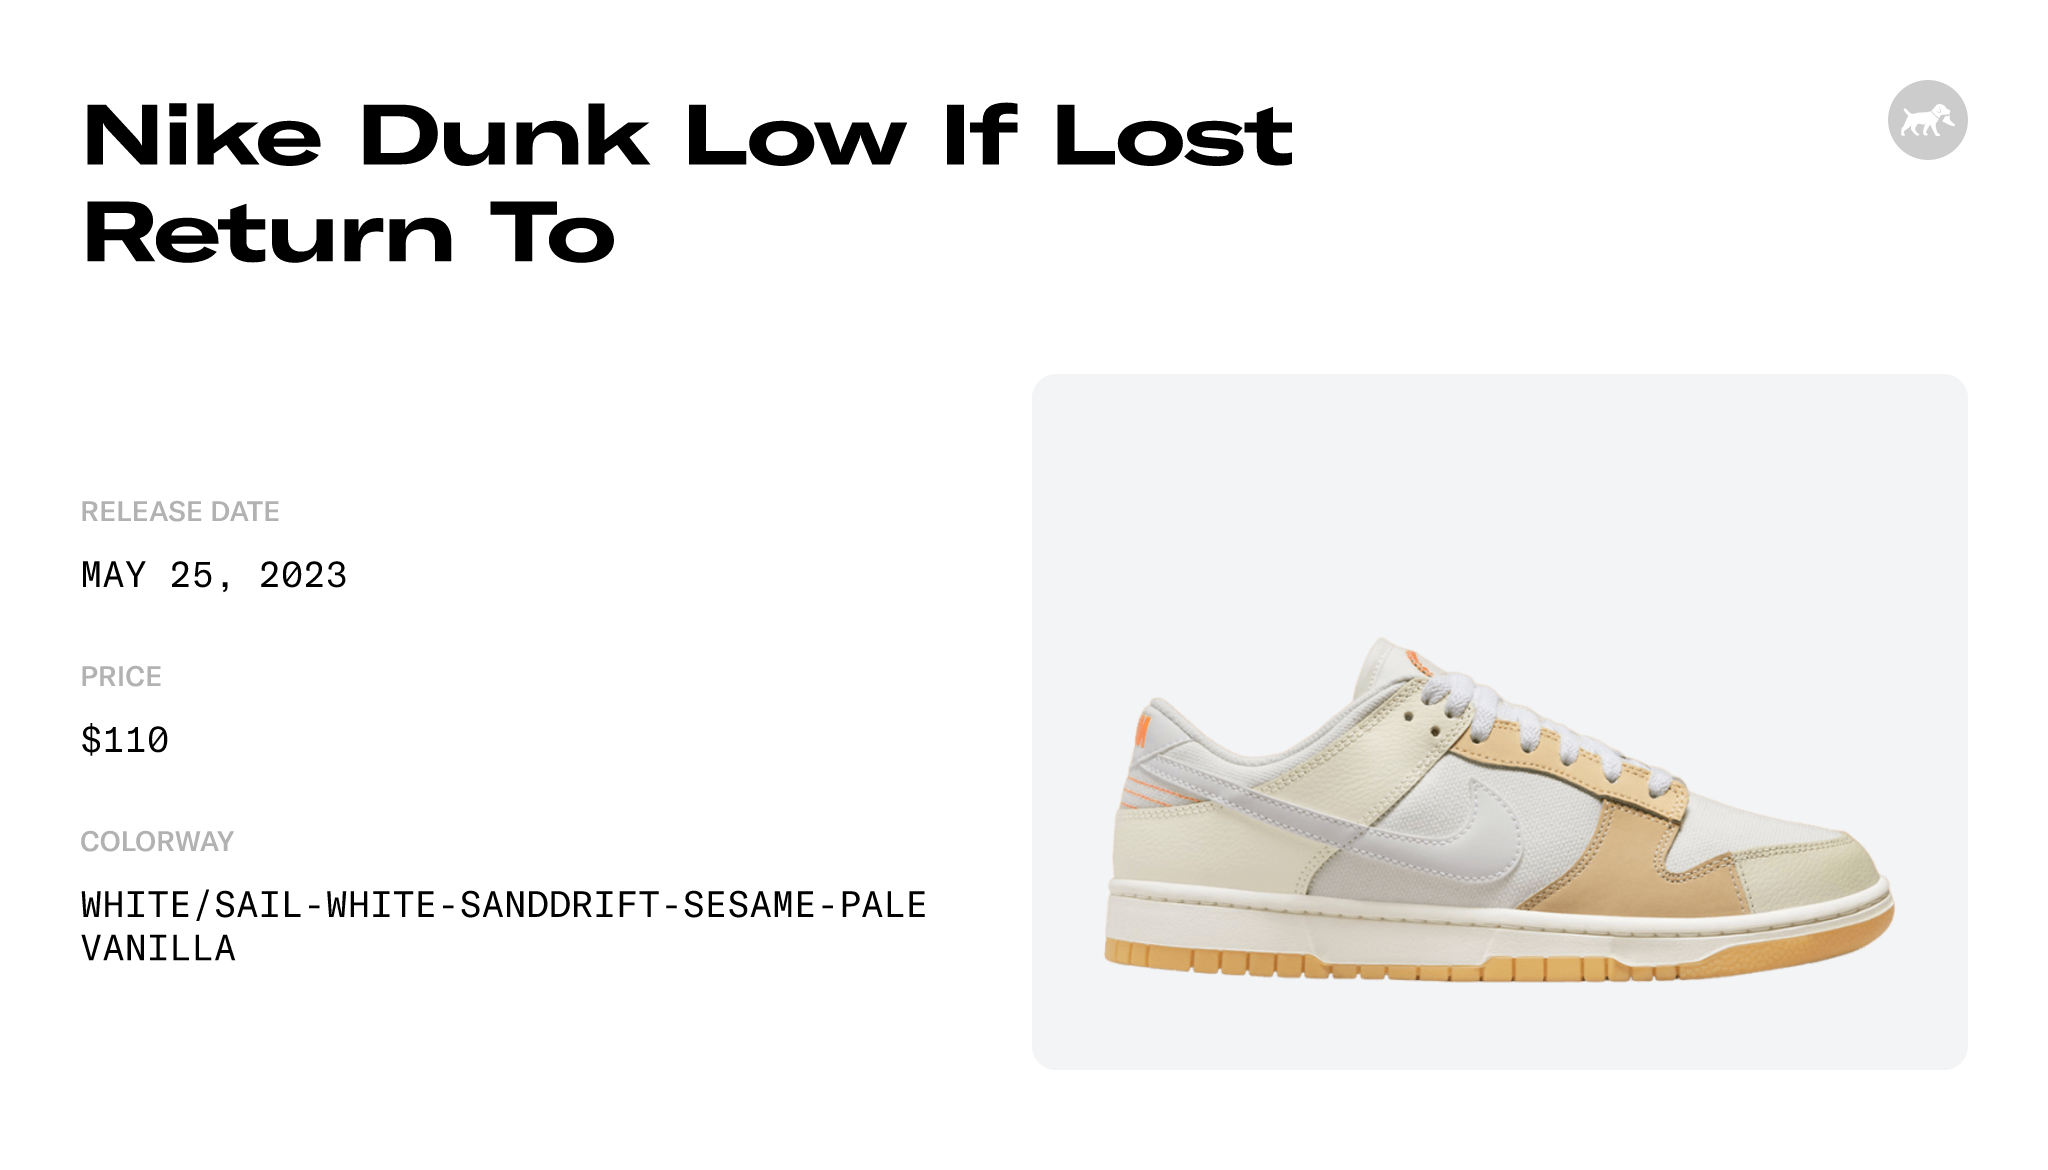 Nike Dunk Low If Lost Return To - FJ5475-100 Raffles and Release Date